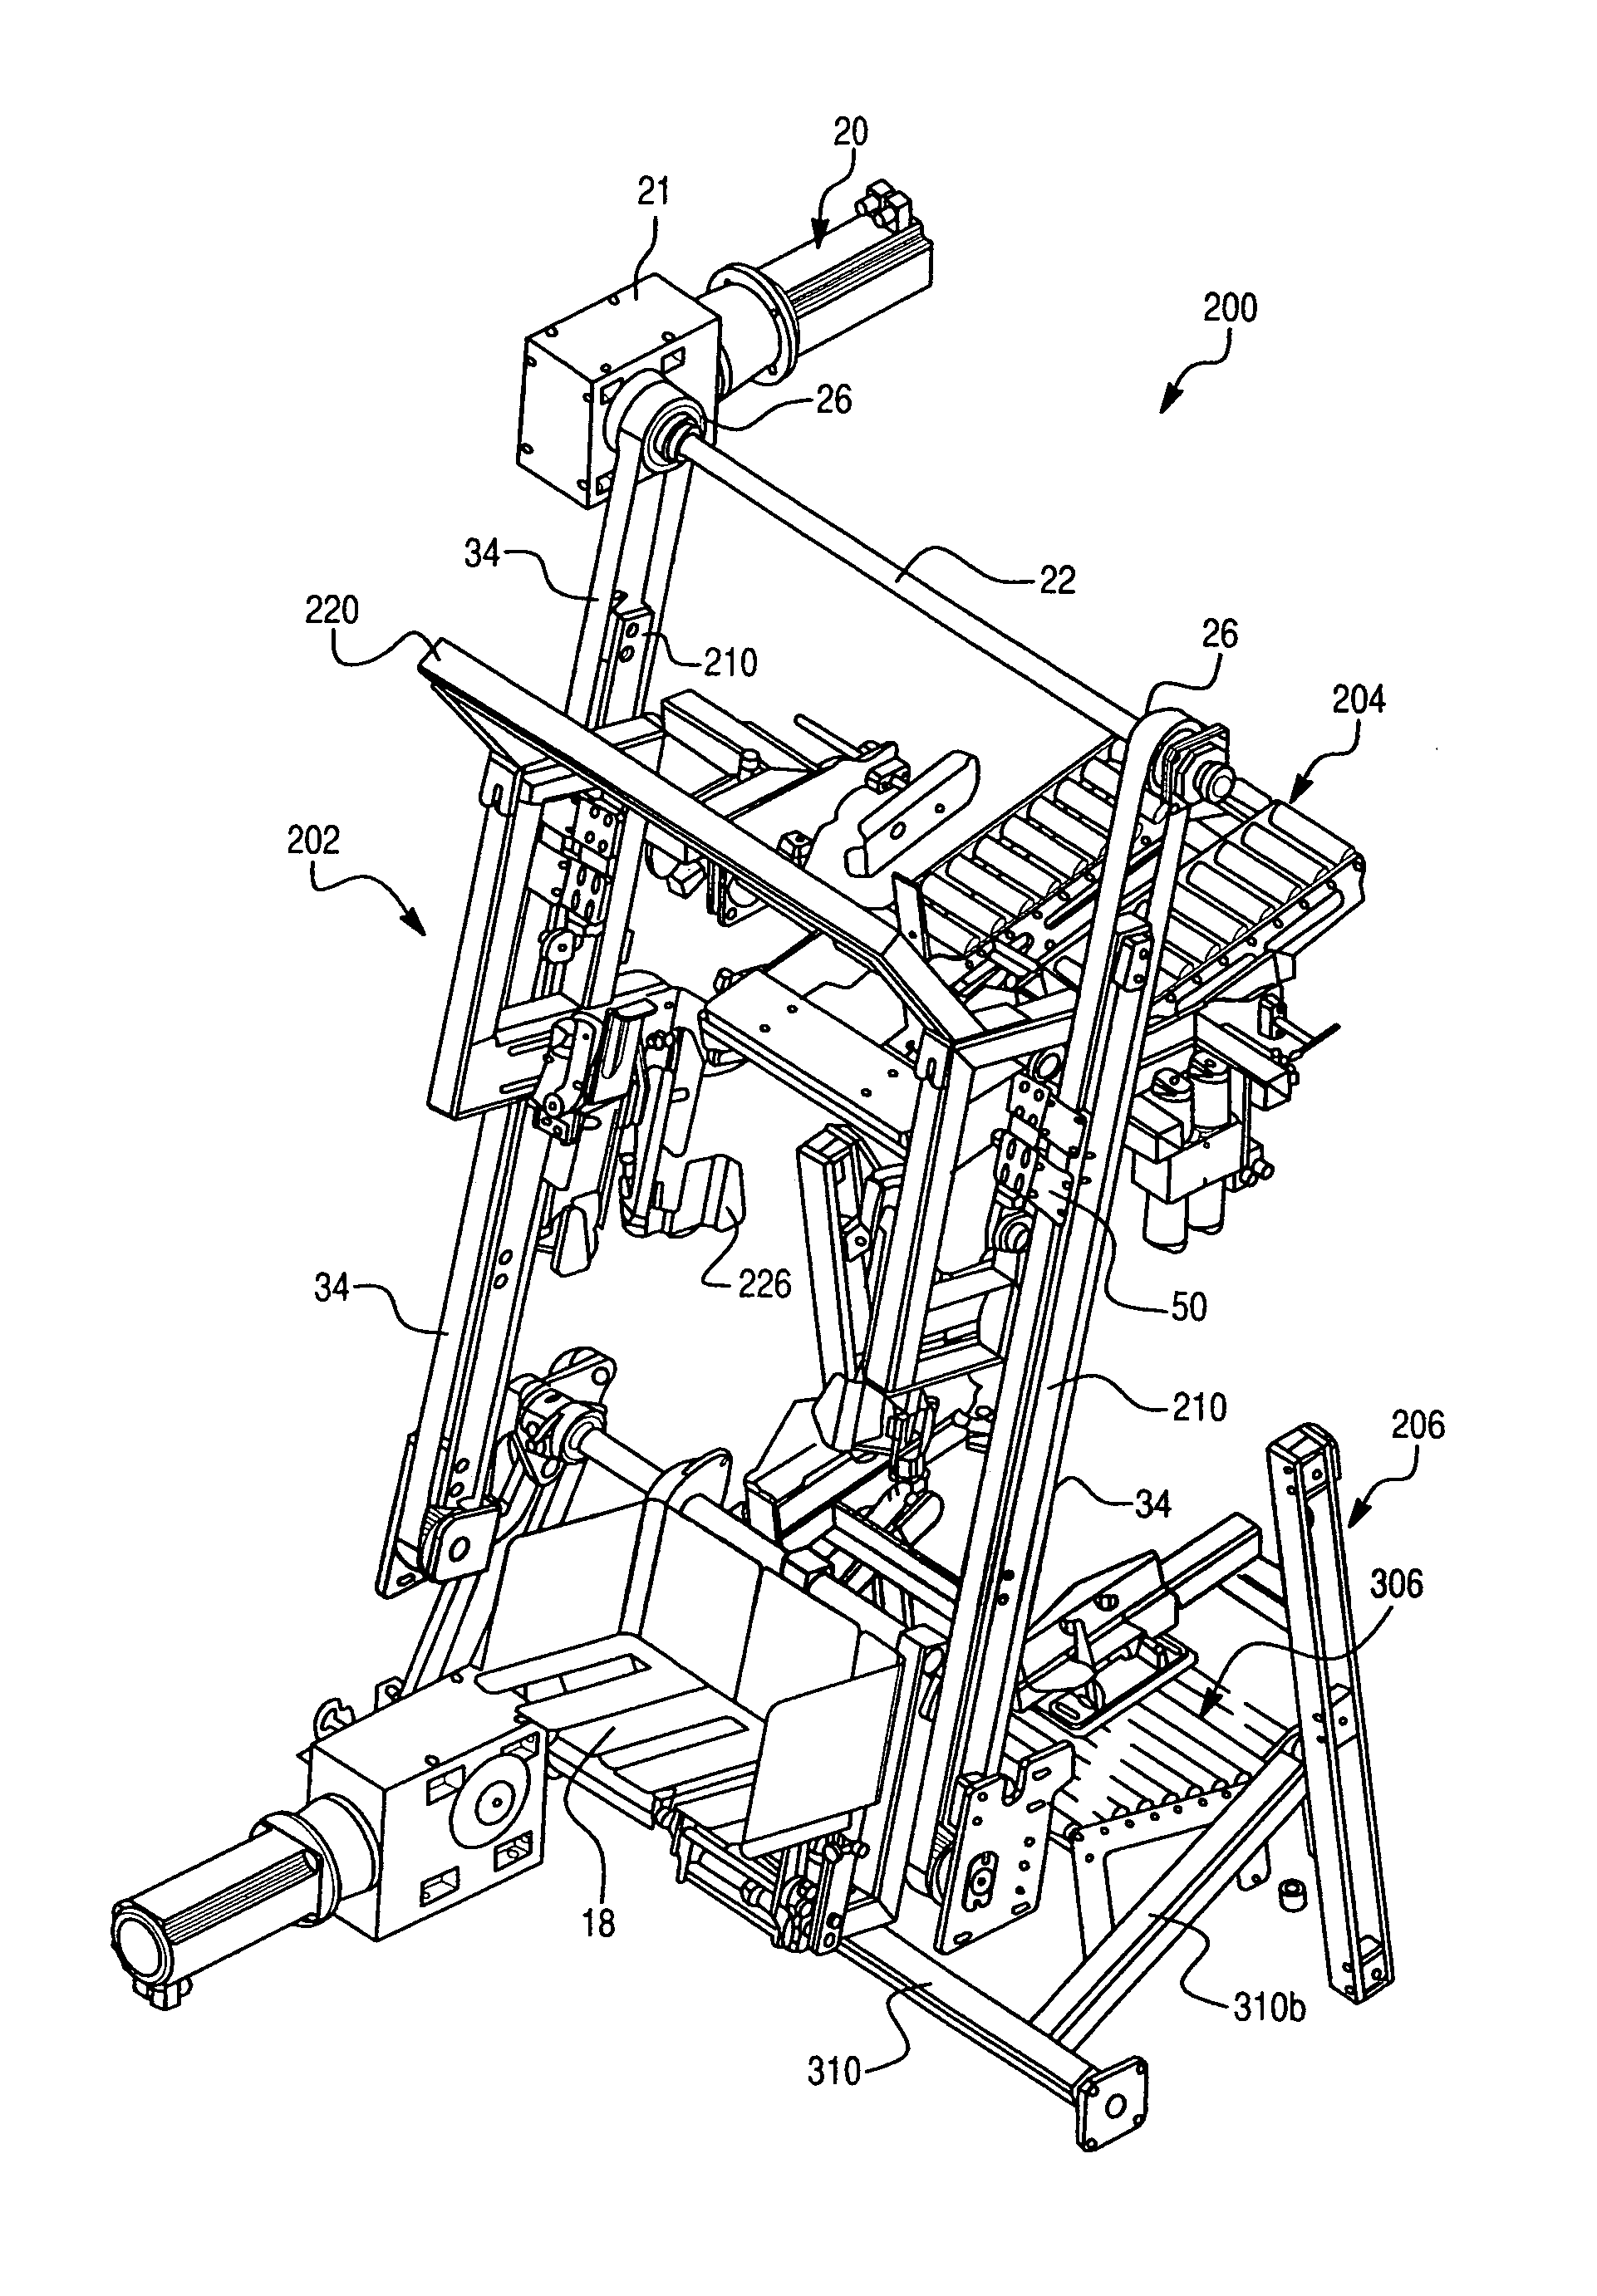 Apparatus for packing